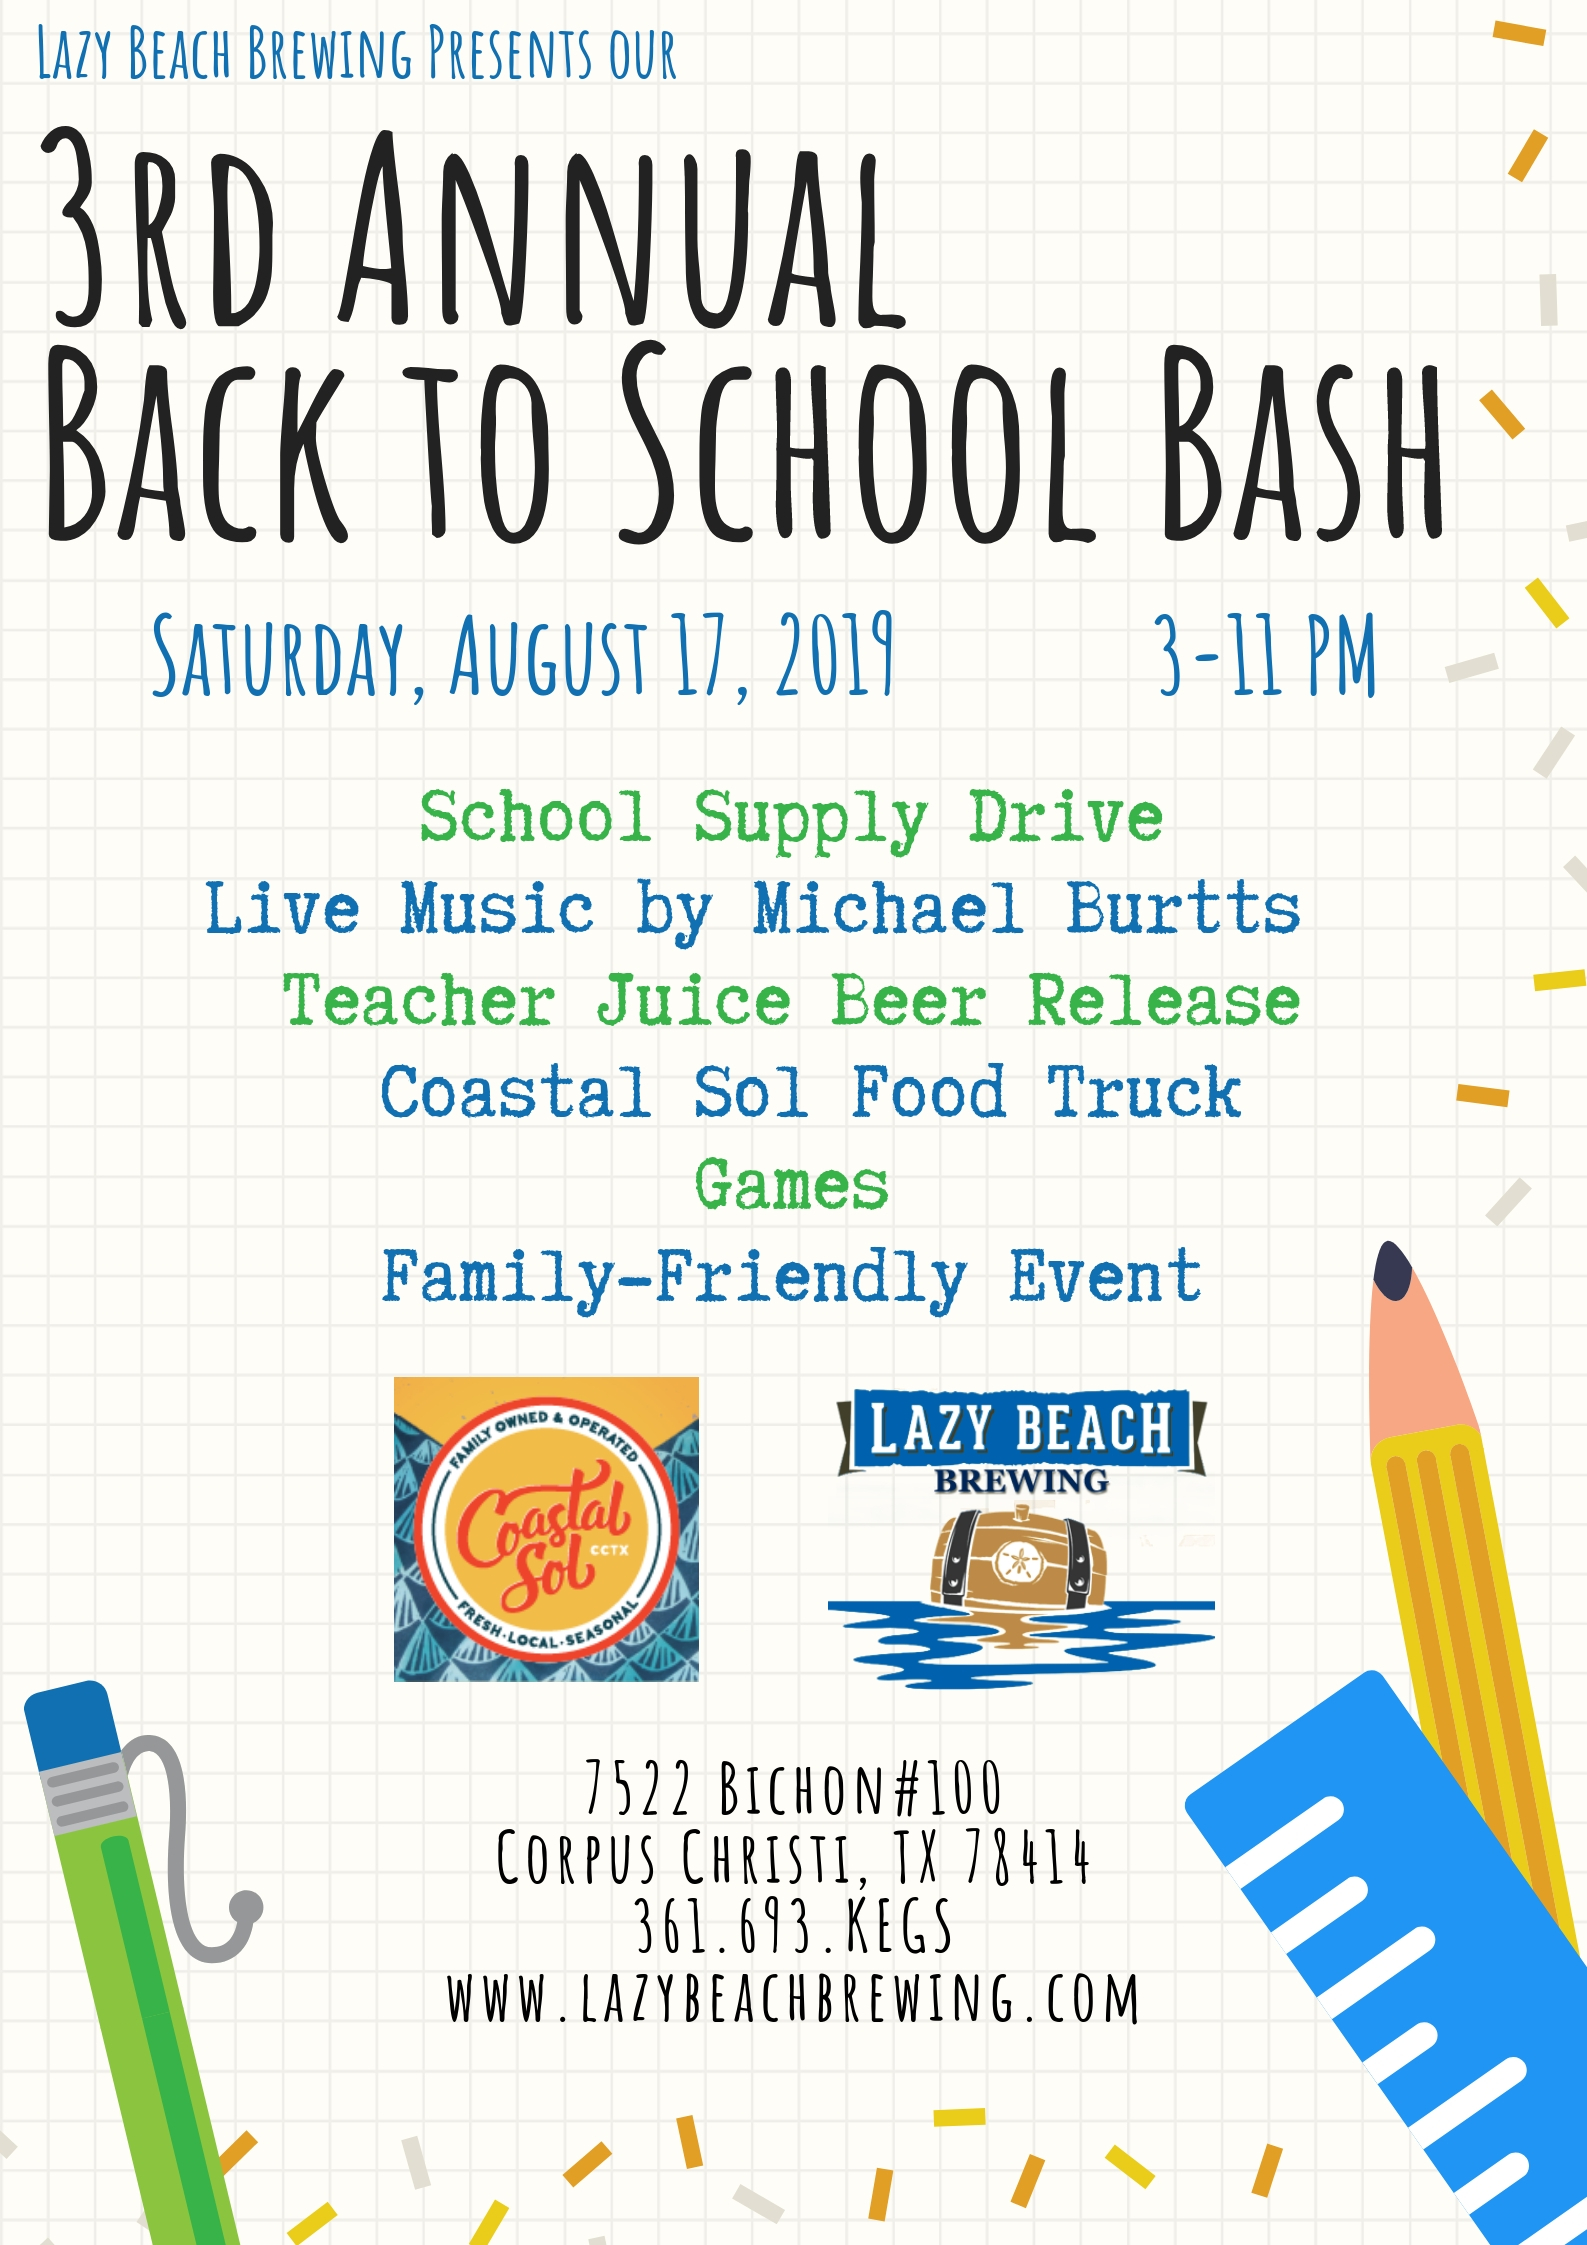 Back to School Bash this Saturday!